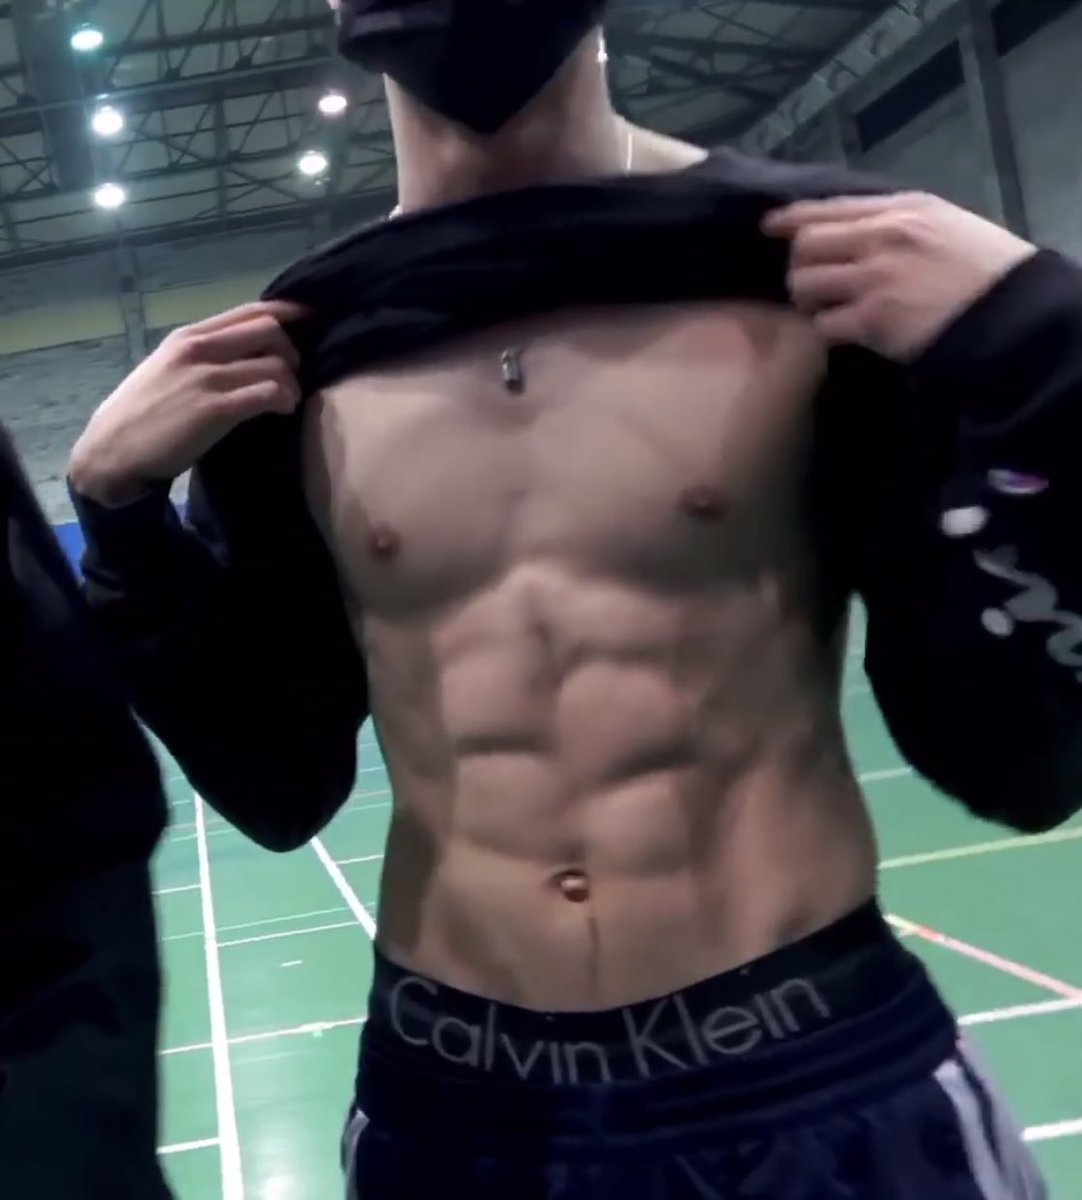 did you know that jaehyun is built asf?i am not sexualizing him. im just saying that putting anybody next to jaehyun, a very competitive and sporty taekwondo black belter that can basically do anything is a set up why would u do that to ur faves